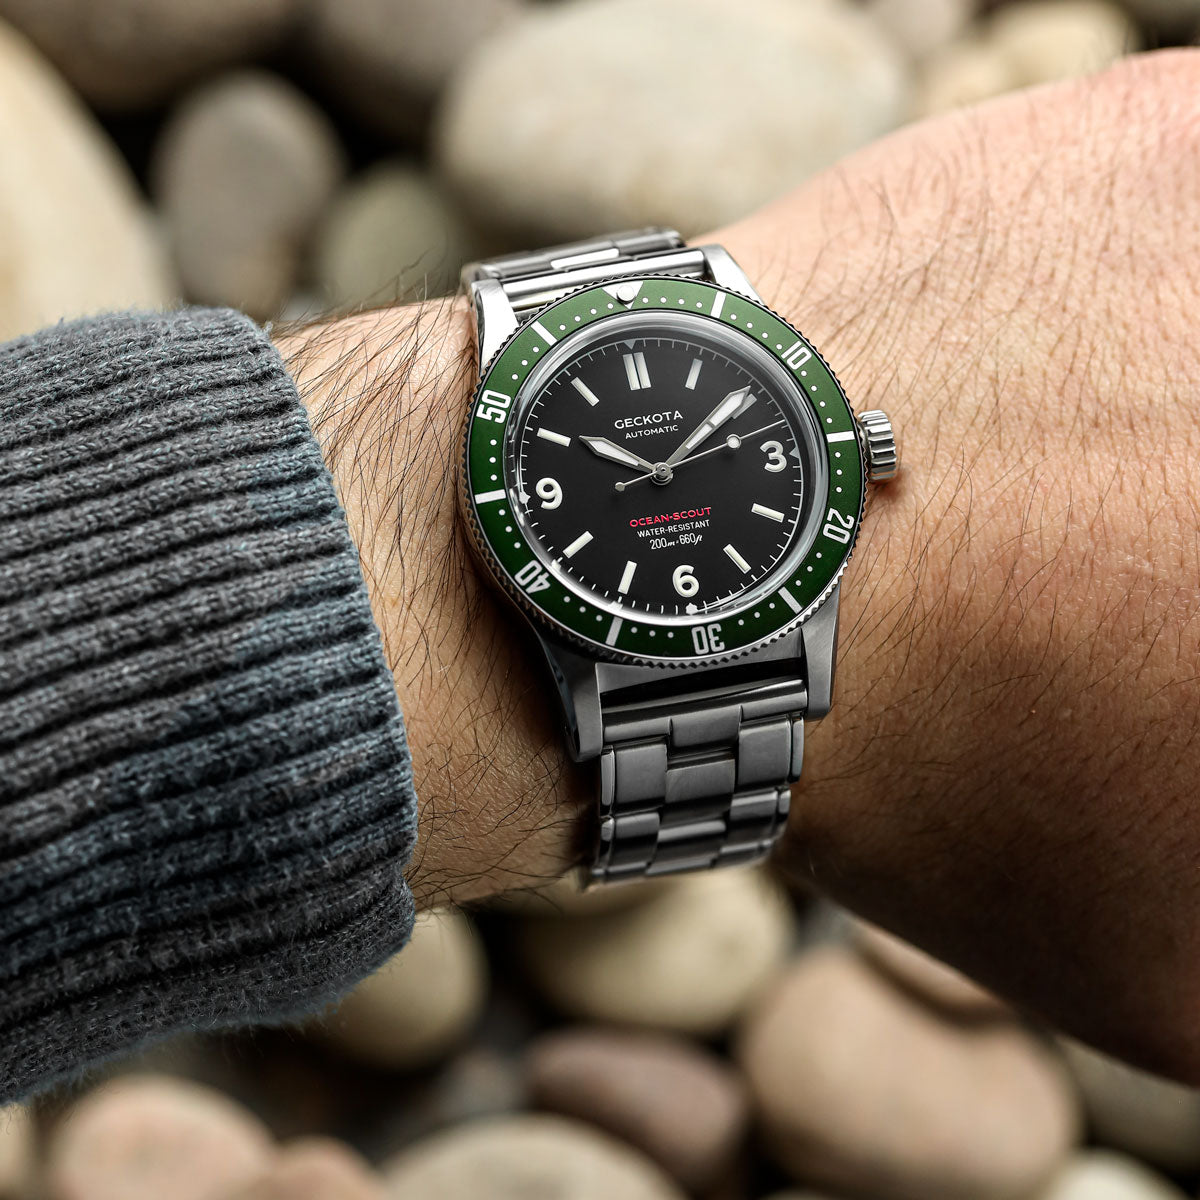 Geckota Ocean-Scout Dive Watch - Emerald Green - Berwick Stainless Steel Strap - additional image 1